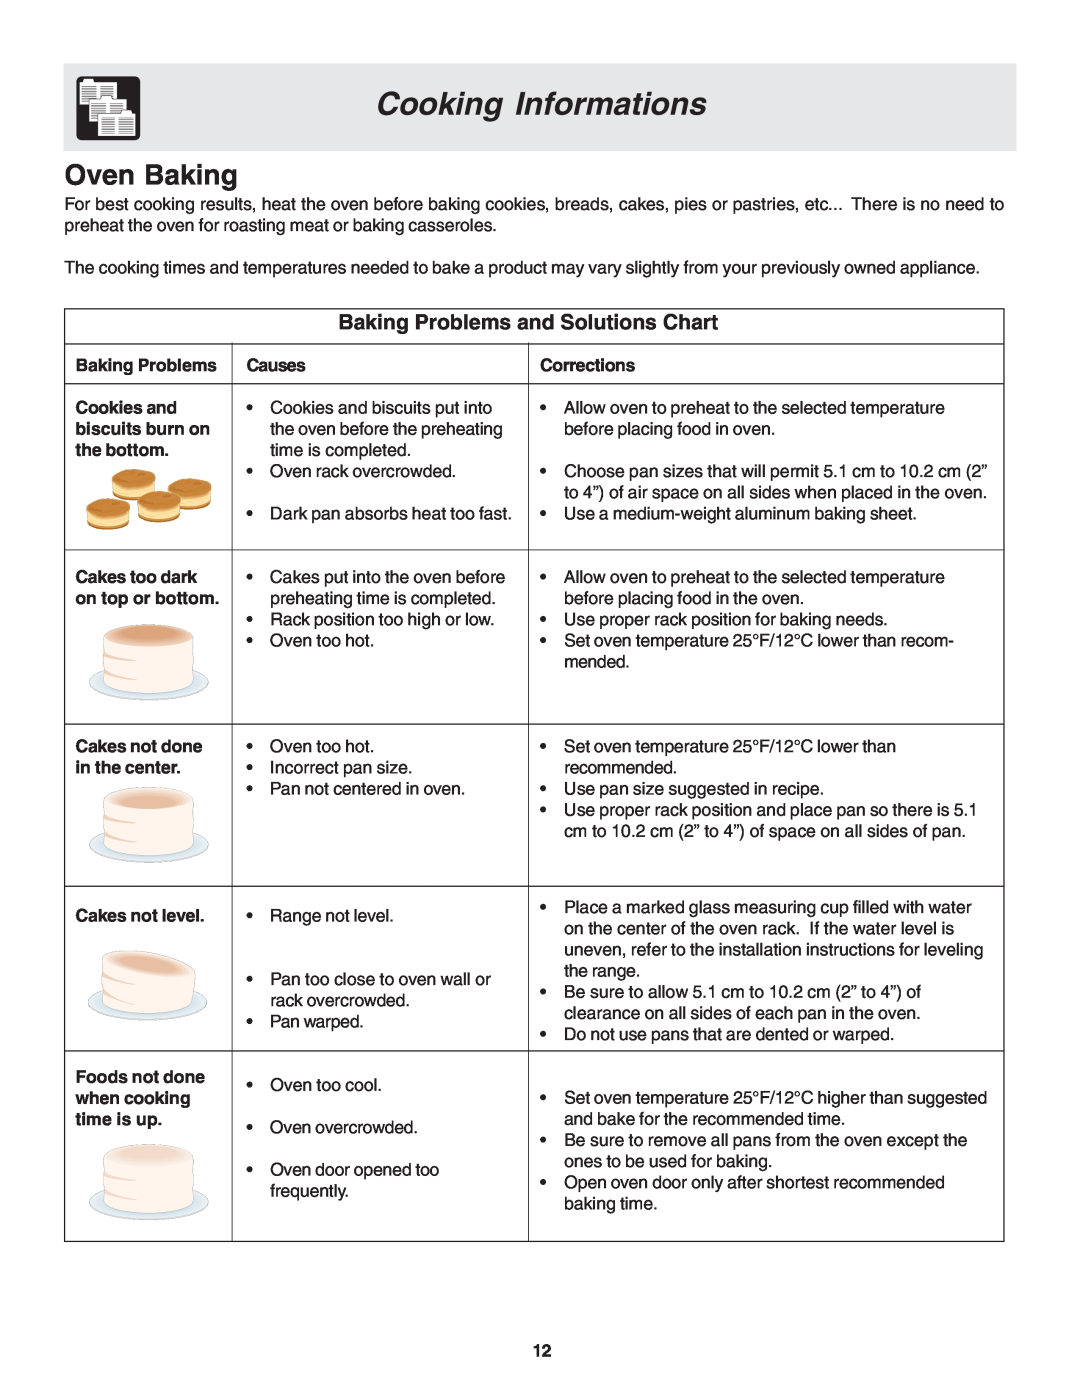 Frigidaire 318200439 Cooking Informations, Oven Baking, Baking Problems and Solutions Chart, Causes, Corrections 